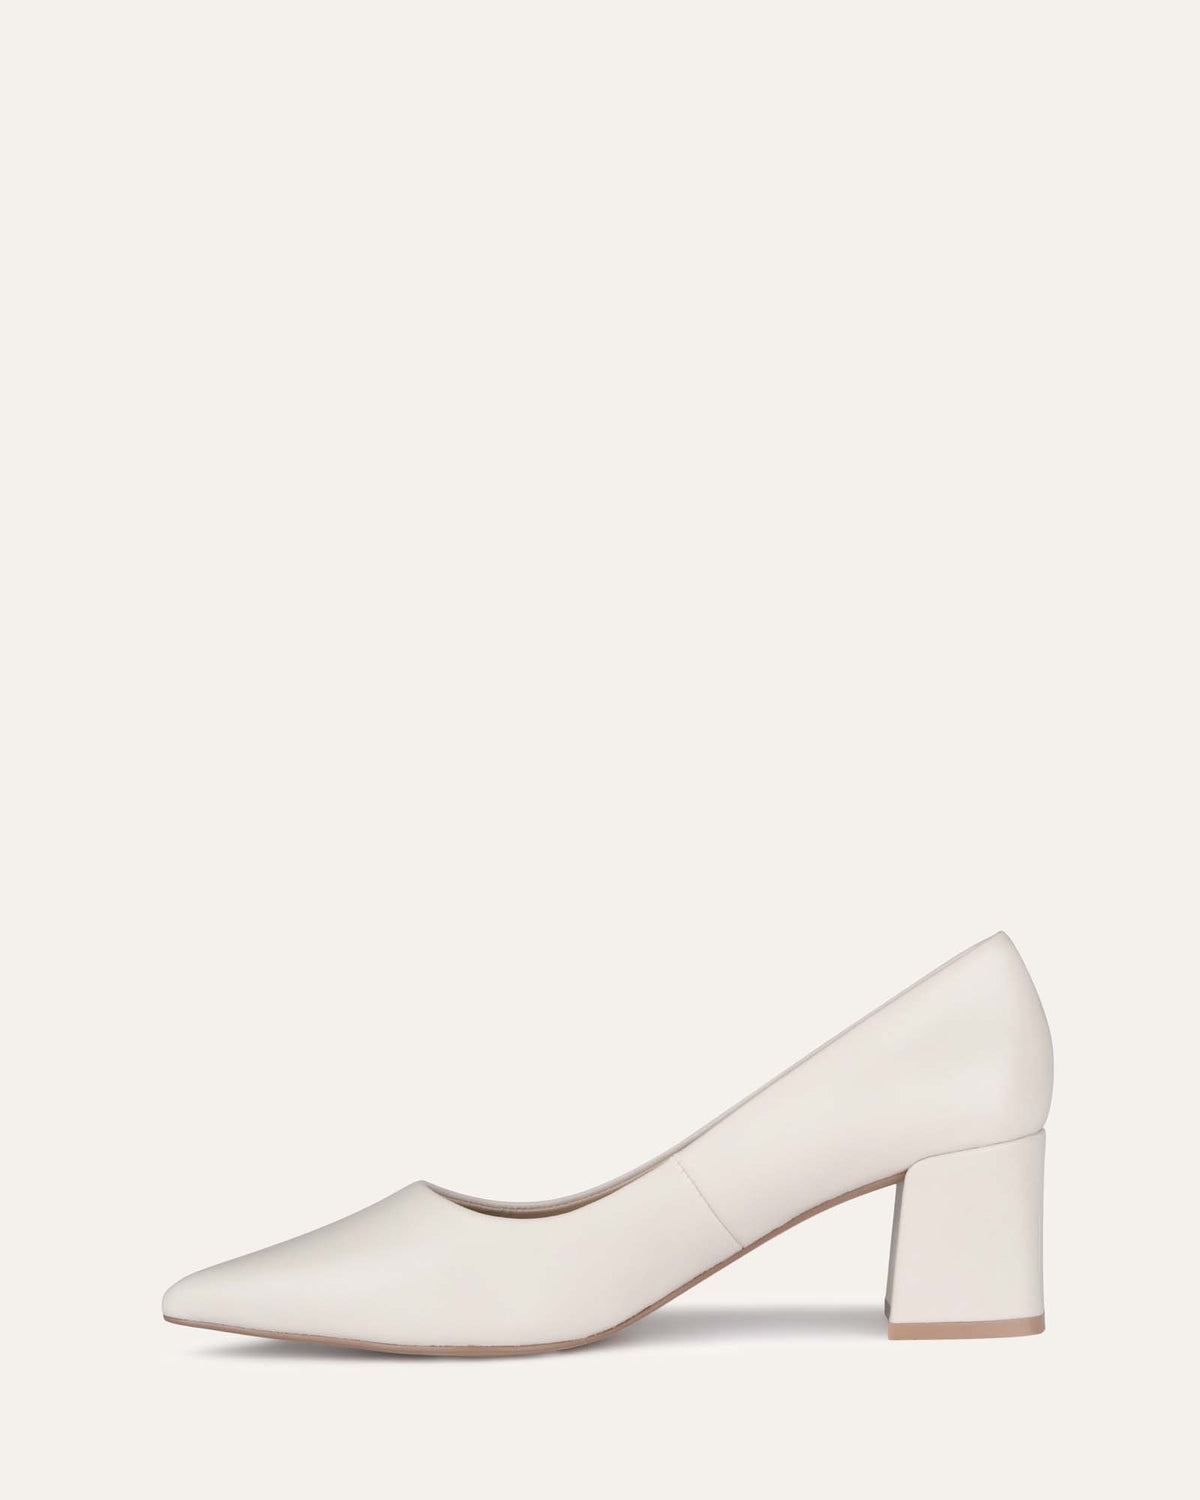 CARRINGTON LOW HEELS OFF WHITE LEATHER